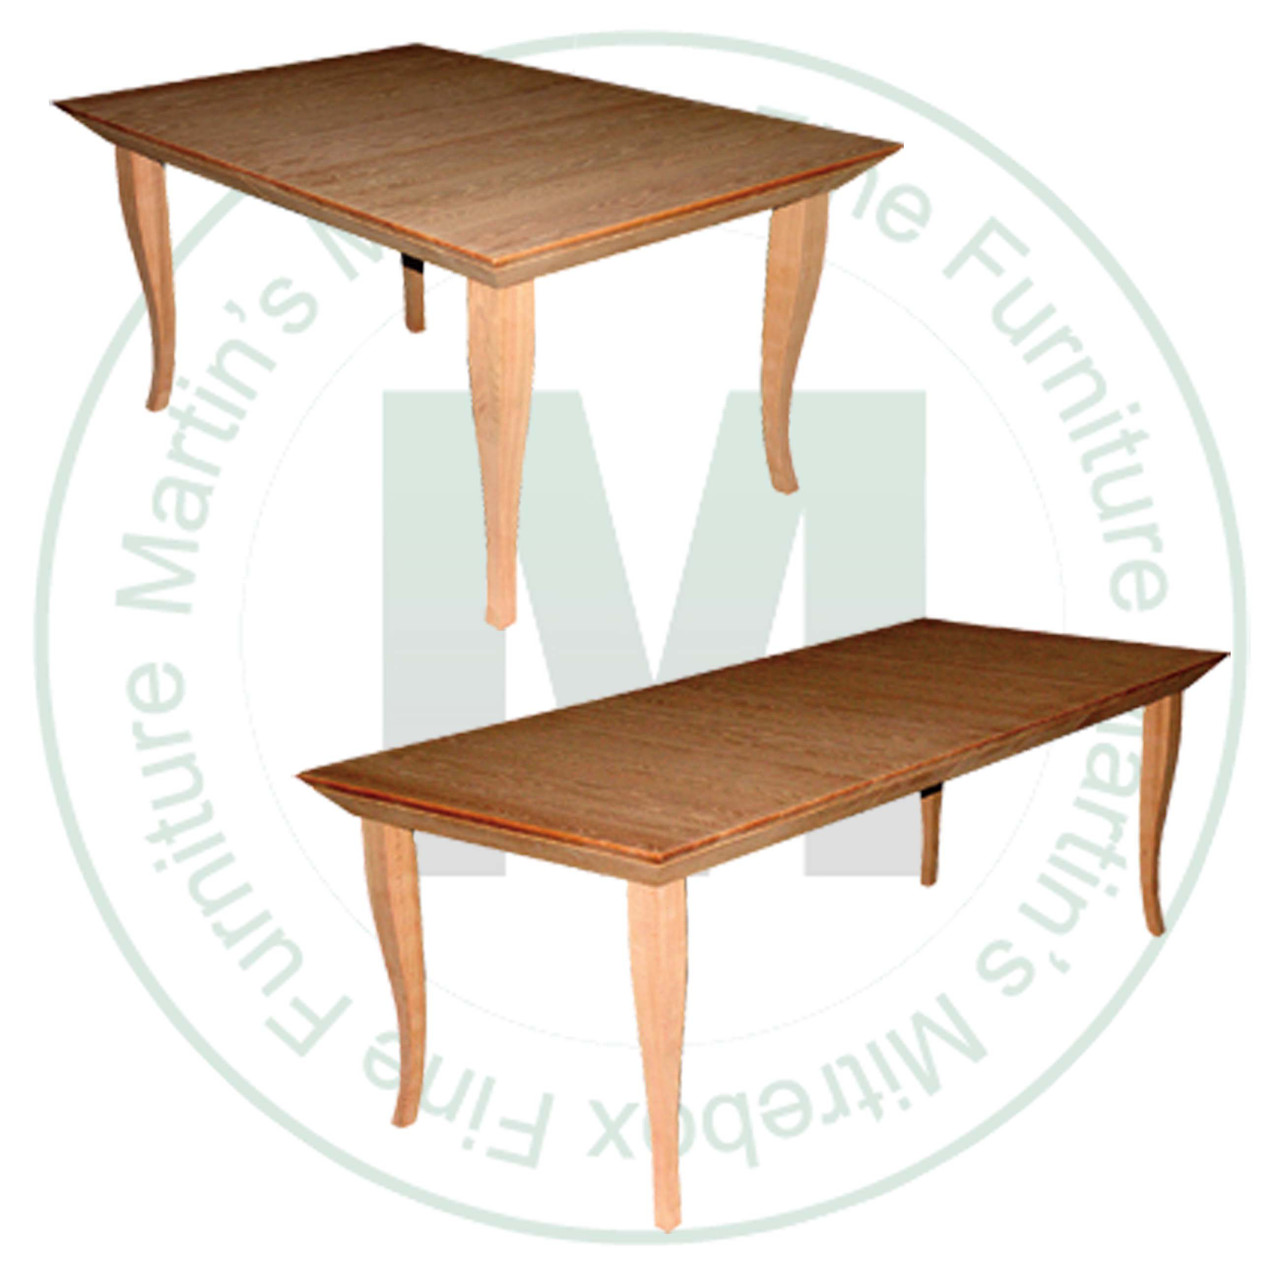 Wormy Maple Bauhaus Extension Harvest Table 42''D x 42''W x 30''H With 2 - 12'' Leaves